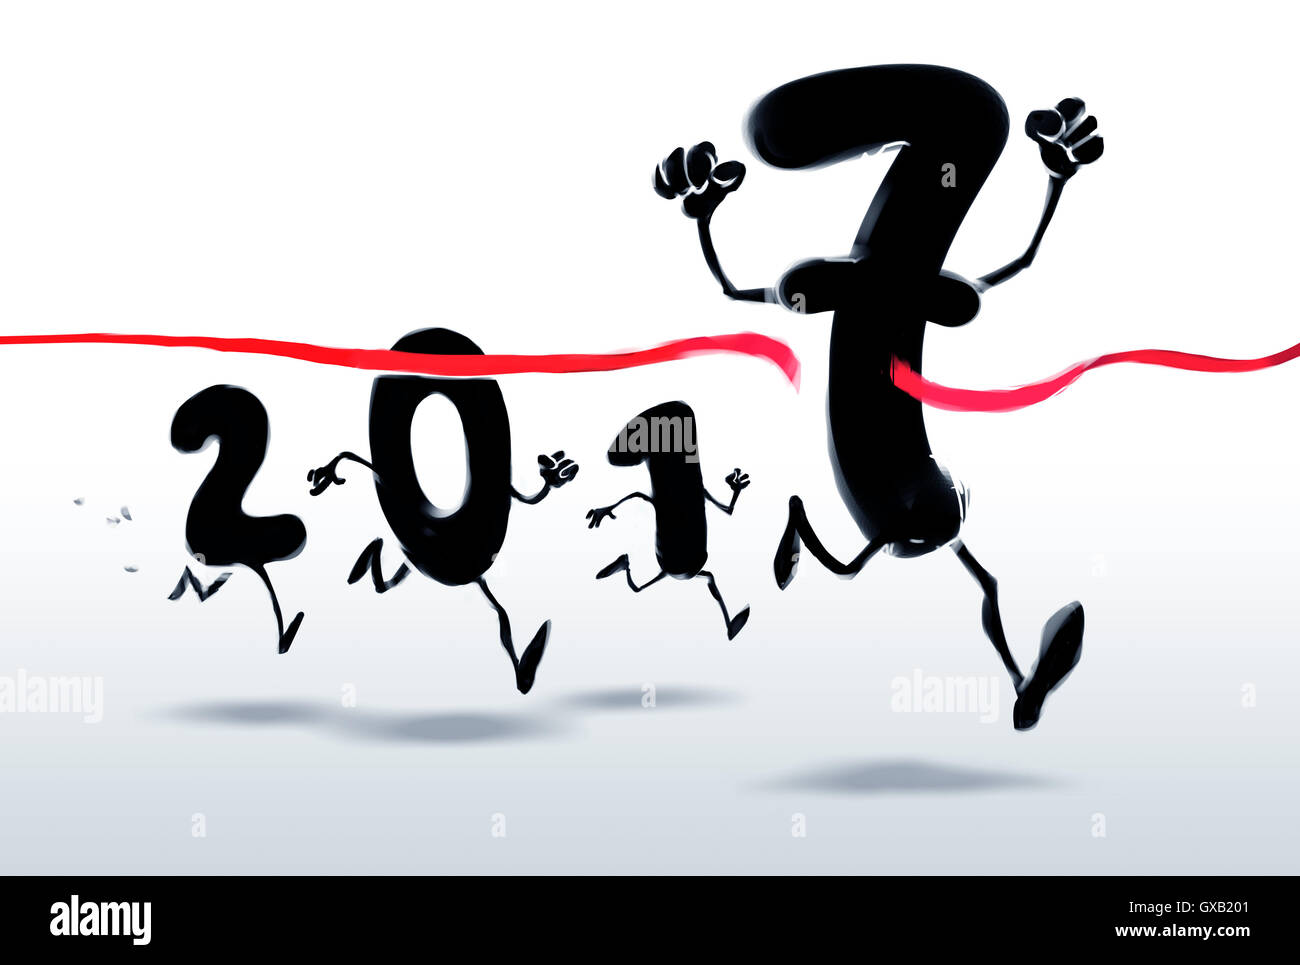 2017 New Year characters crossing the finish line Stock Photo